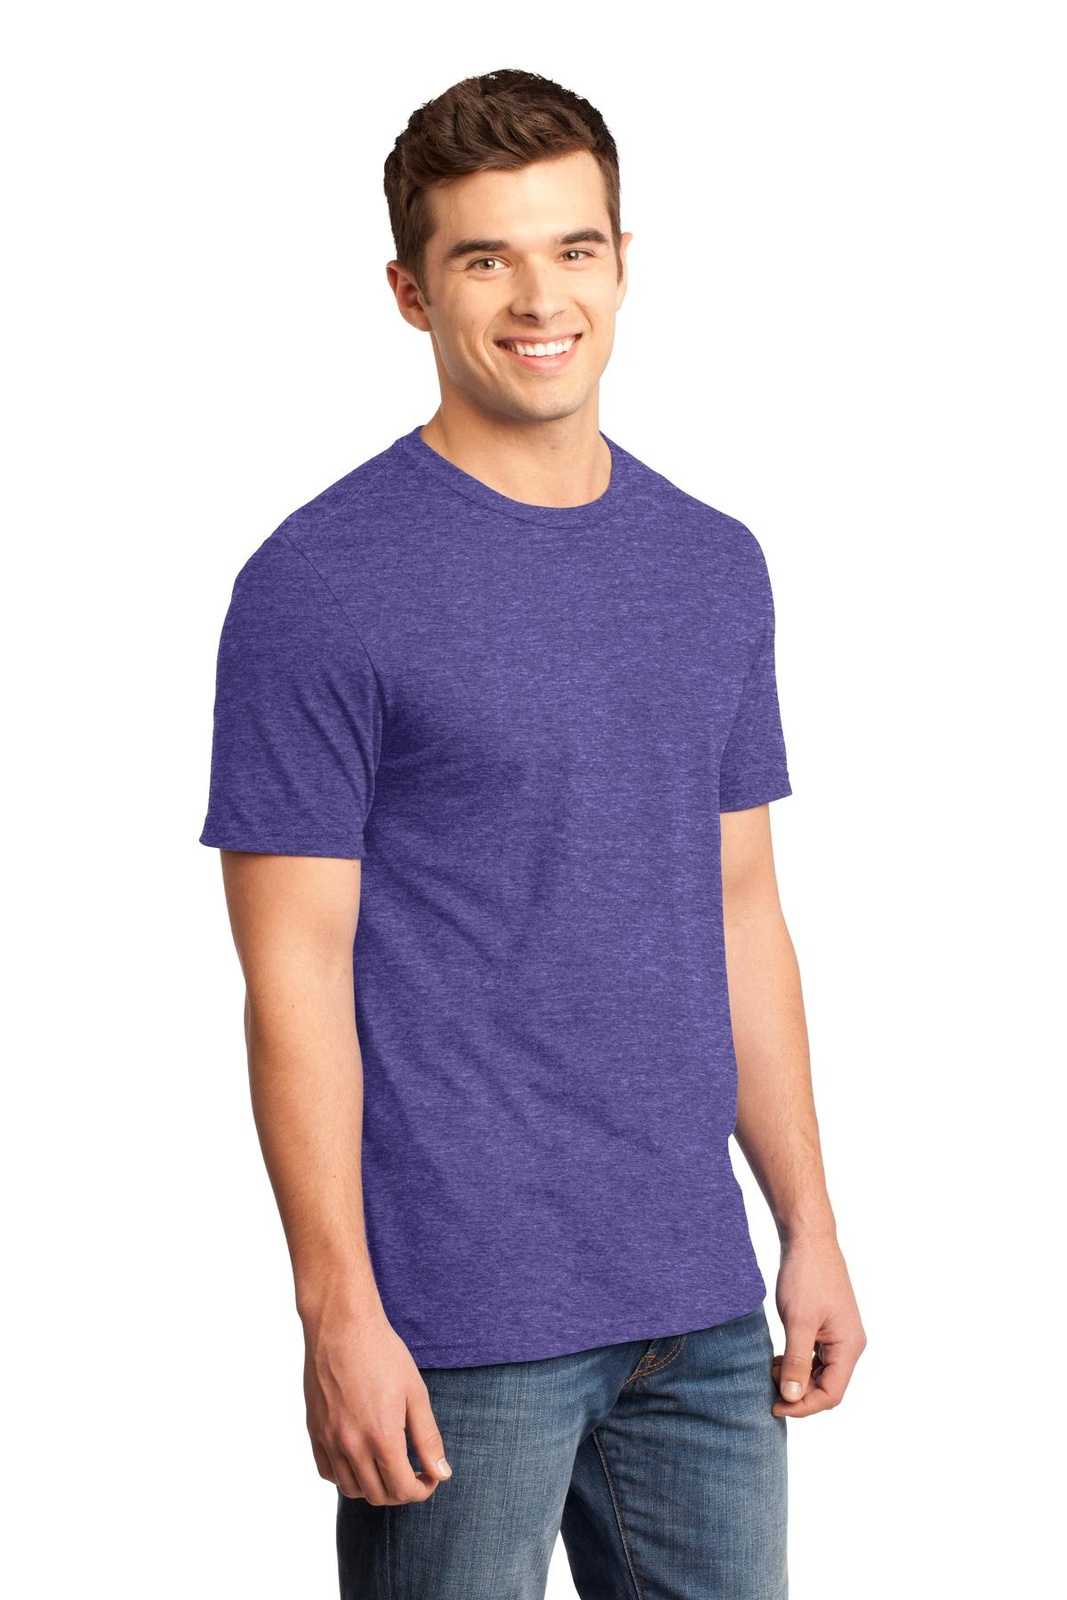 District DT6000 Very Important Tee - Heathered Purple - HIT a Double - 4